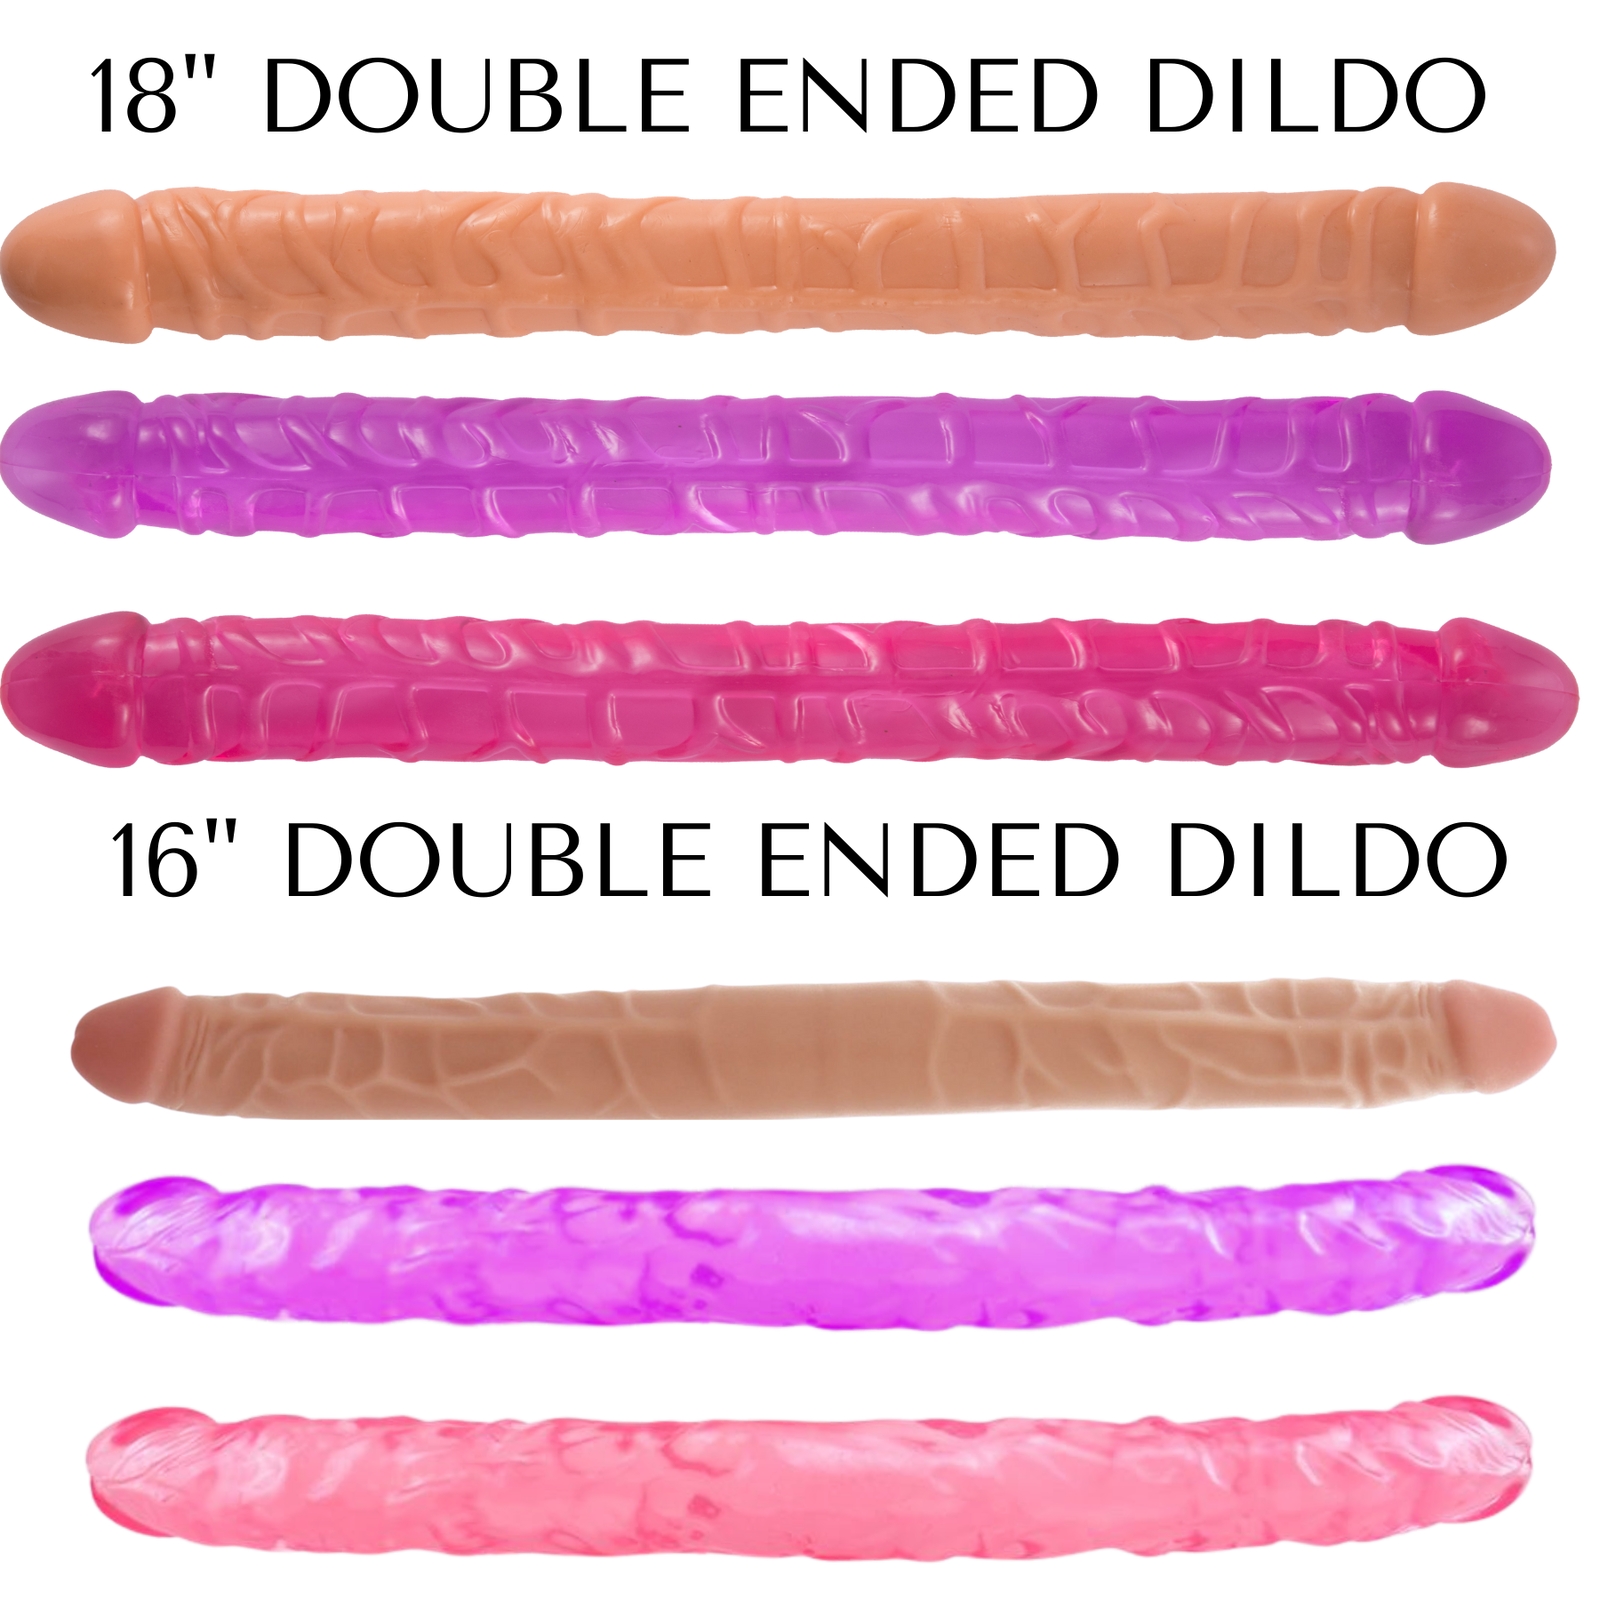 Double-Ended Dildos